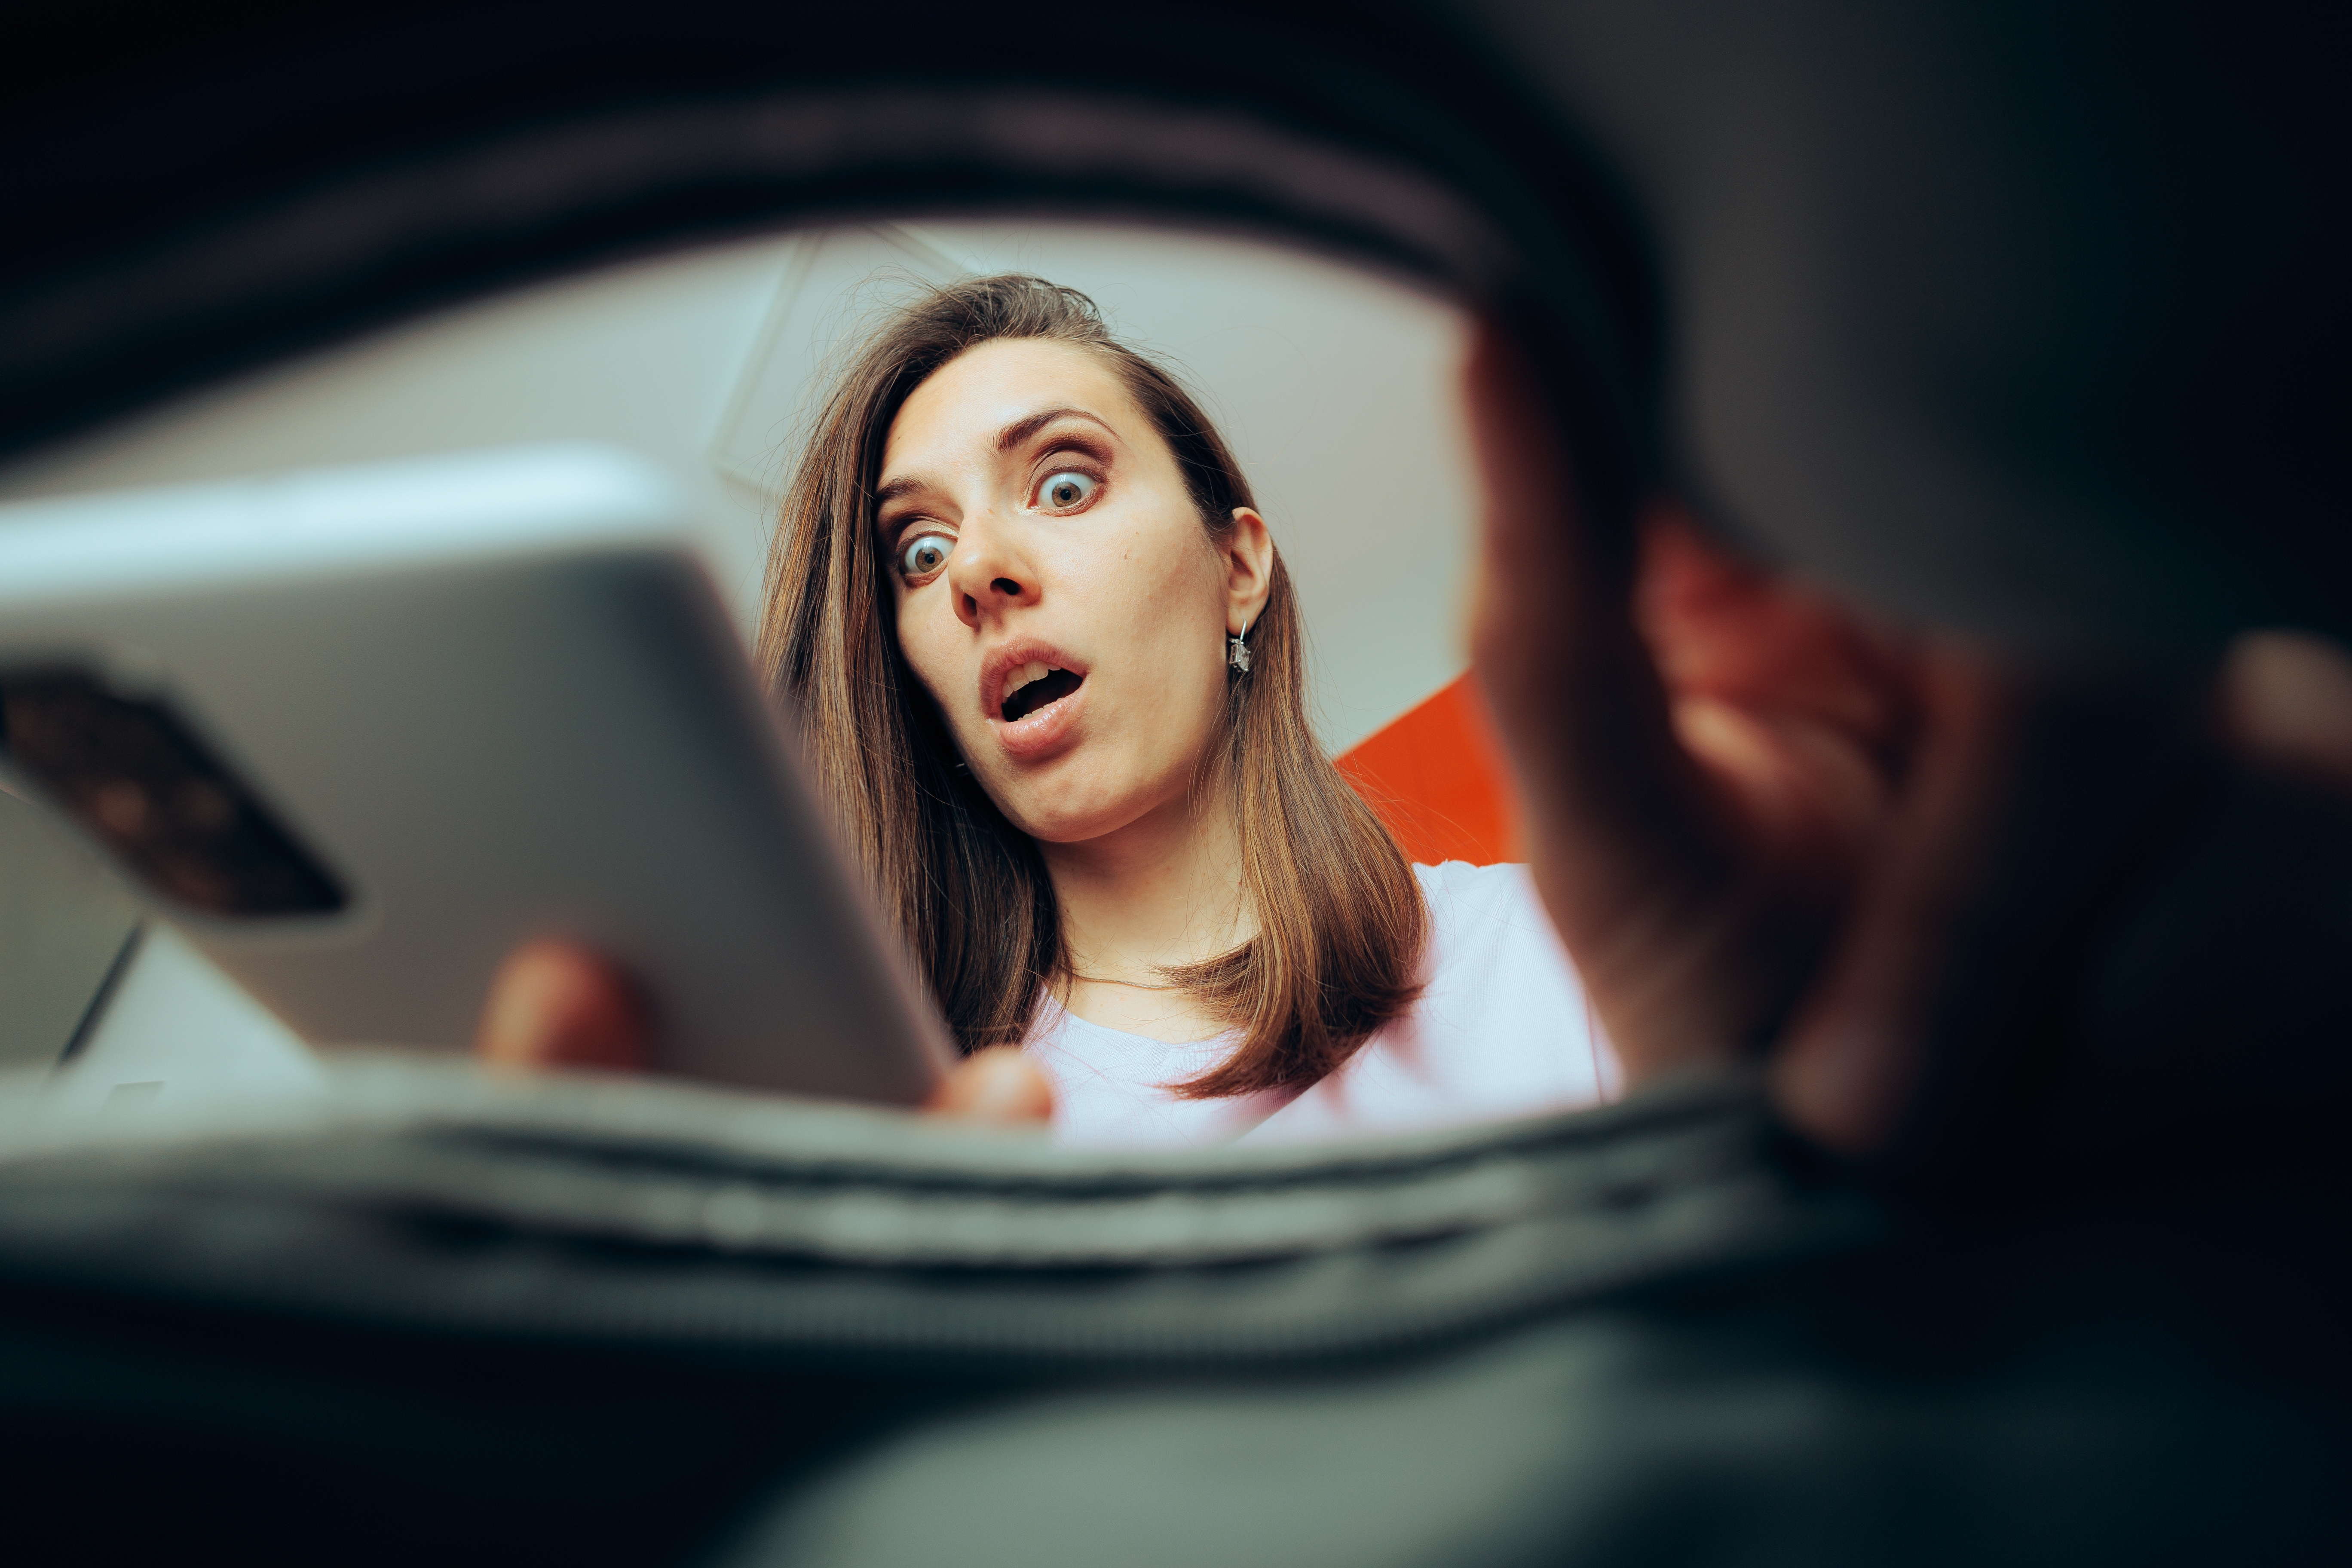 A surprised woman checking her phone ringing | Source: Shutterstock